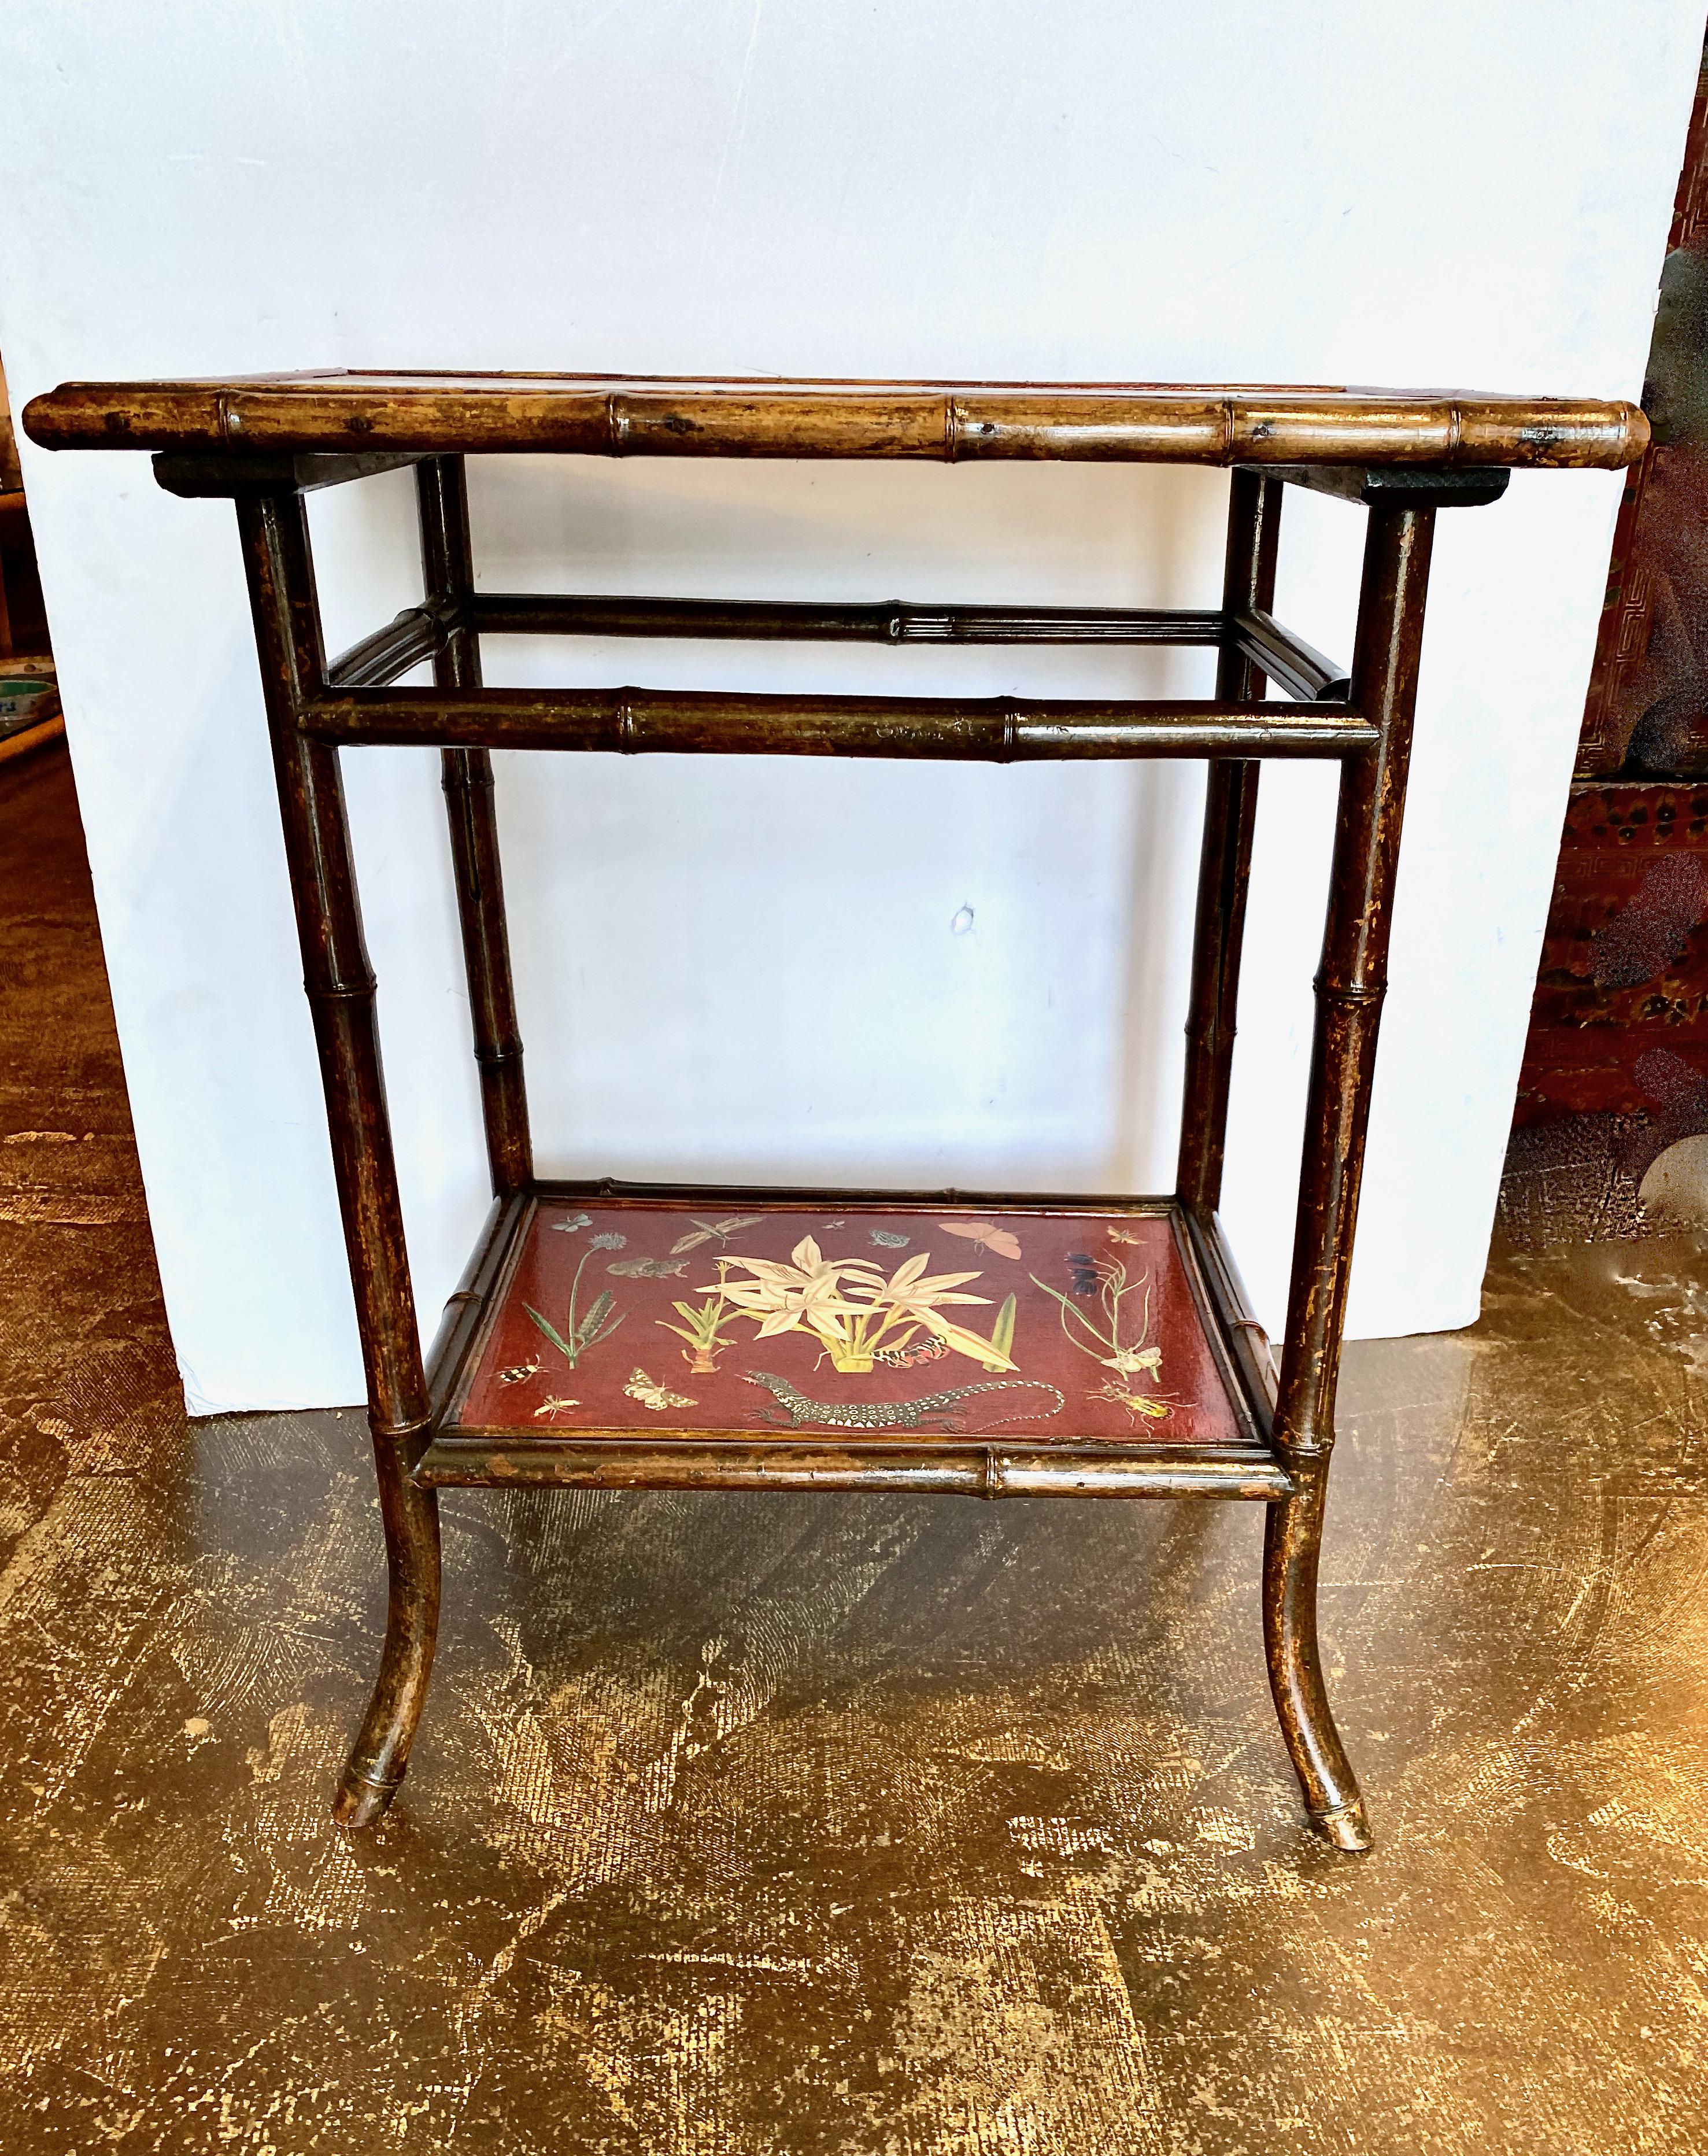 This is a charming early 20th century English Aesthetic Movement Side or Occasional Table. The table features a burnt bamboo frame supporting two tiers of beautifully shelves. The brick red base surface is decorated with vintage colored print cutout